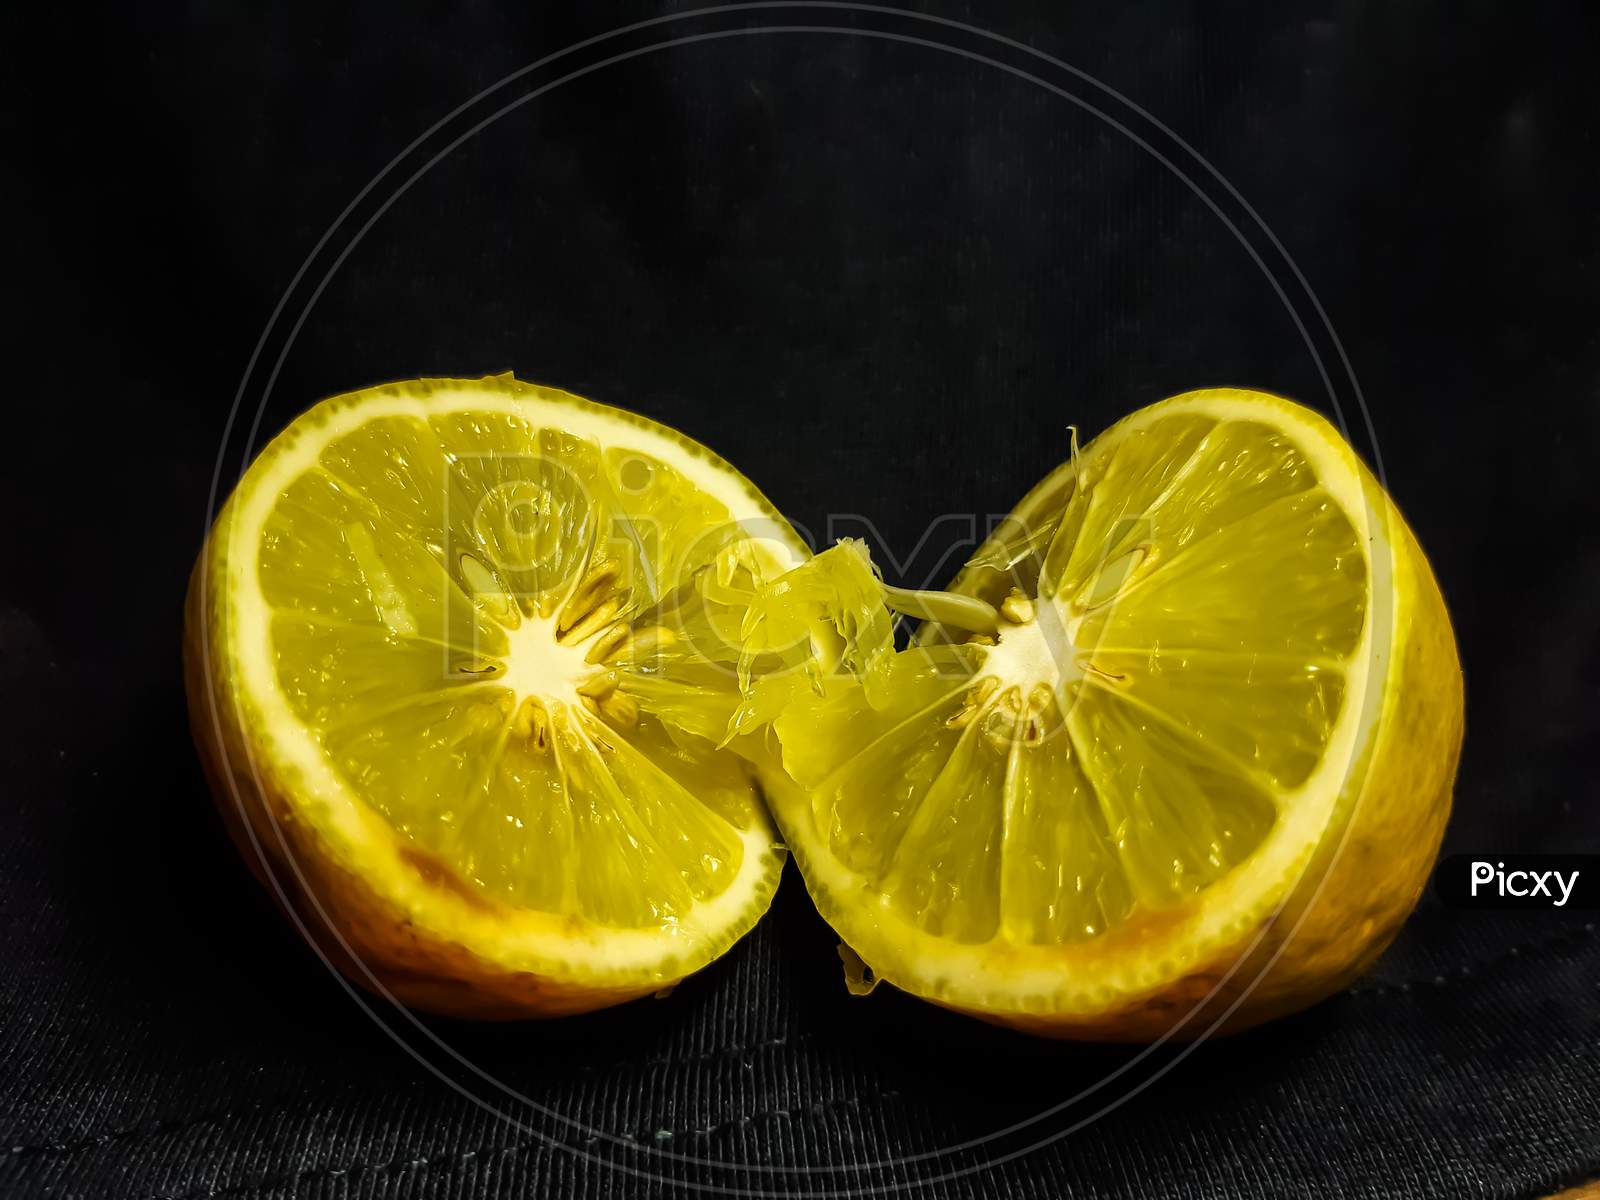 A Lemon Is Cut In The Middle And It Is On A Black Background.